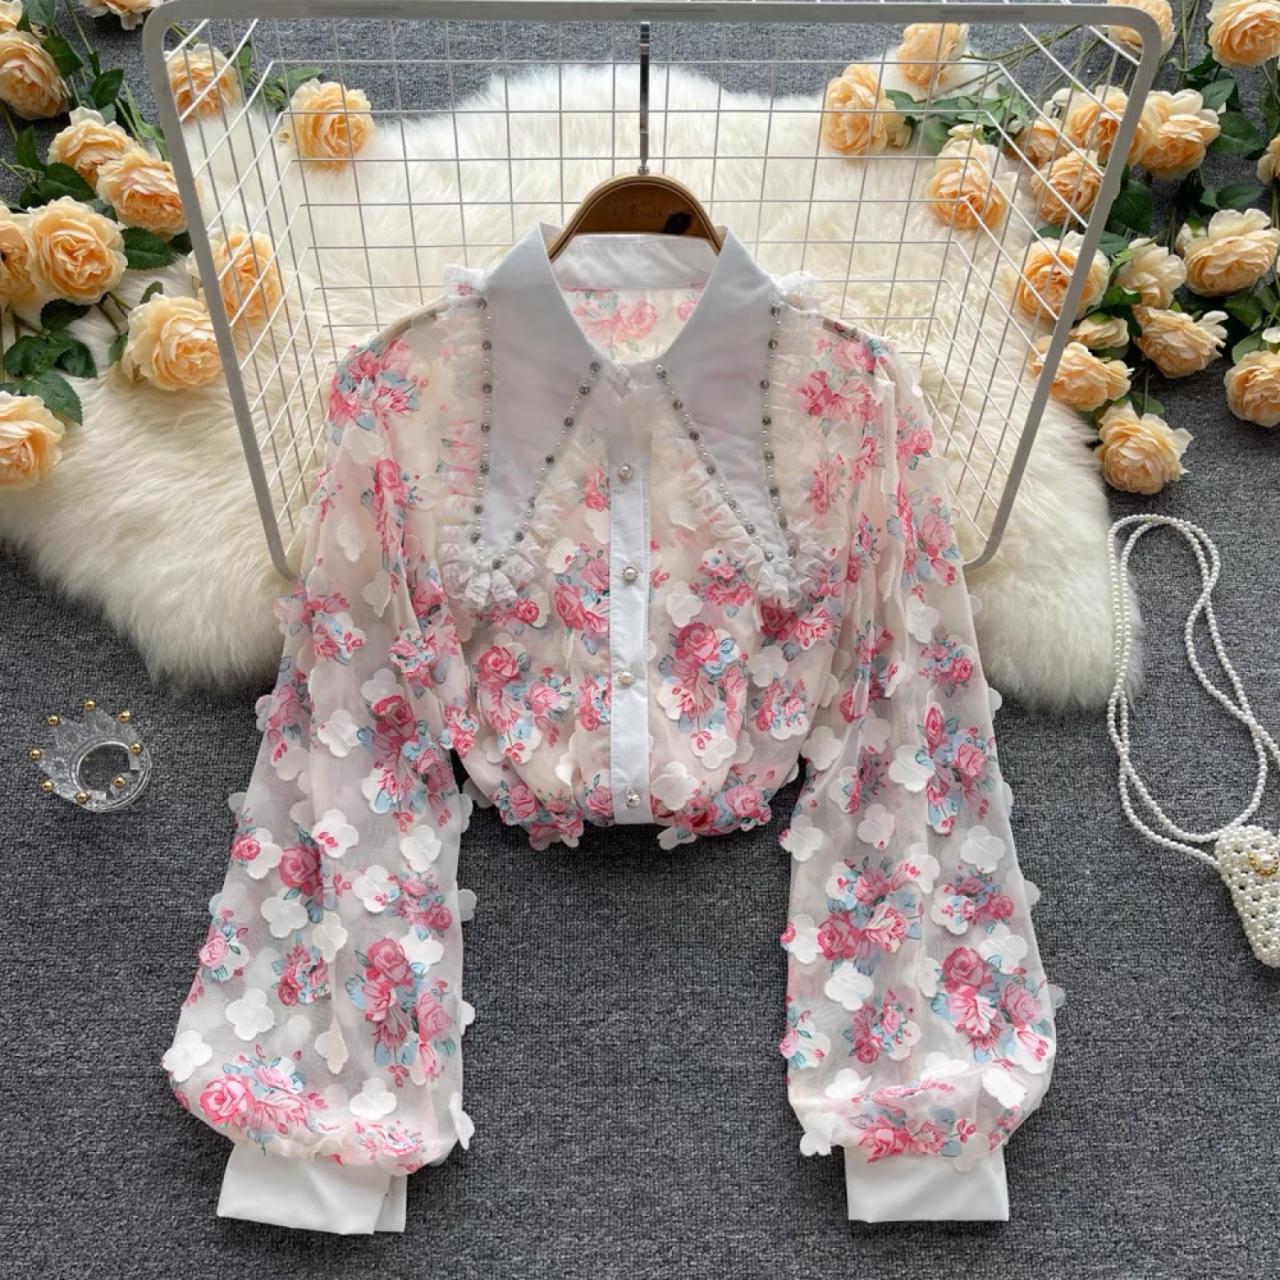 Stereo Petals, Heavy Nail Beads, Lace Blouse, Chiffon Shirt With Baby Collar